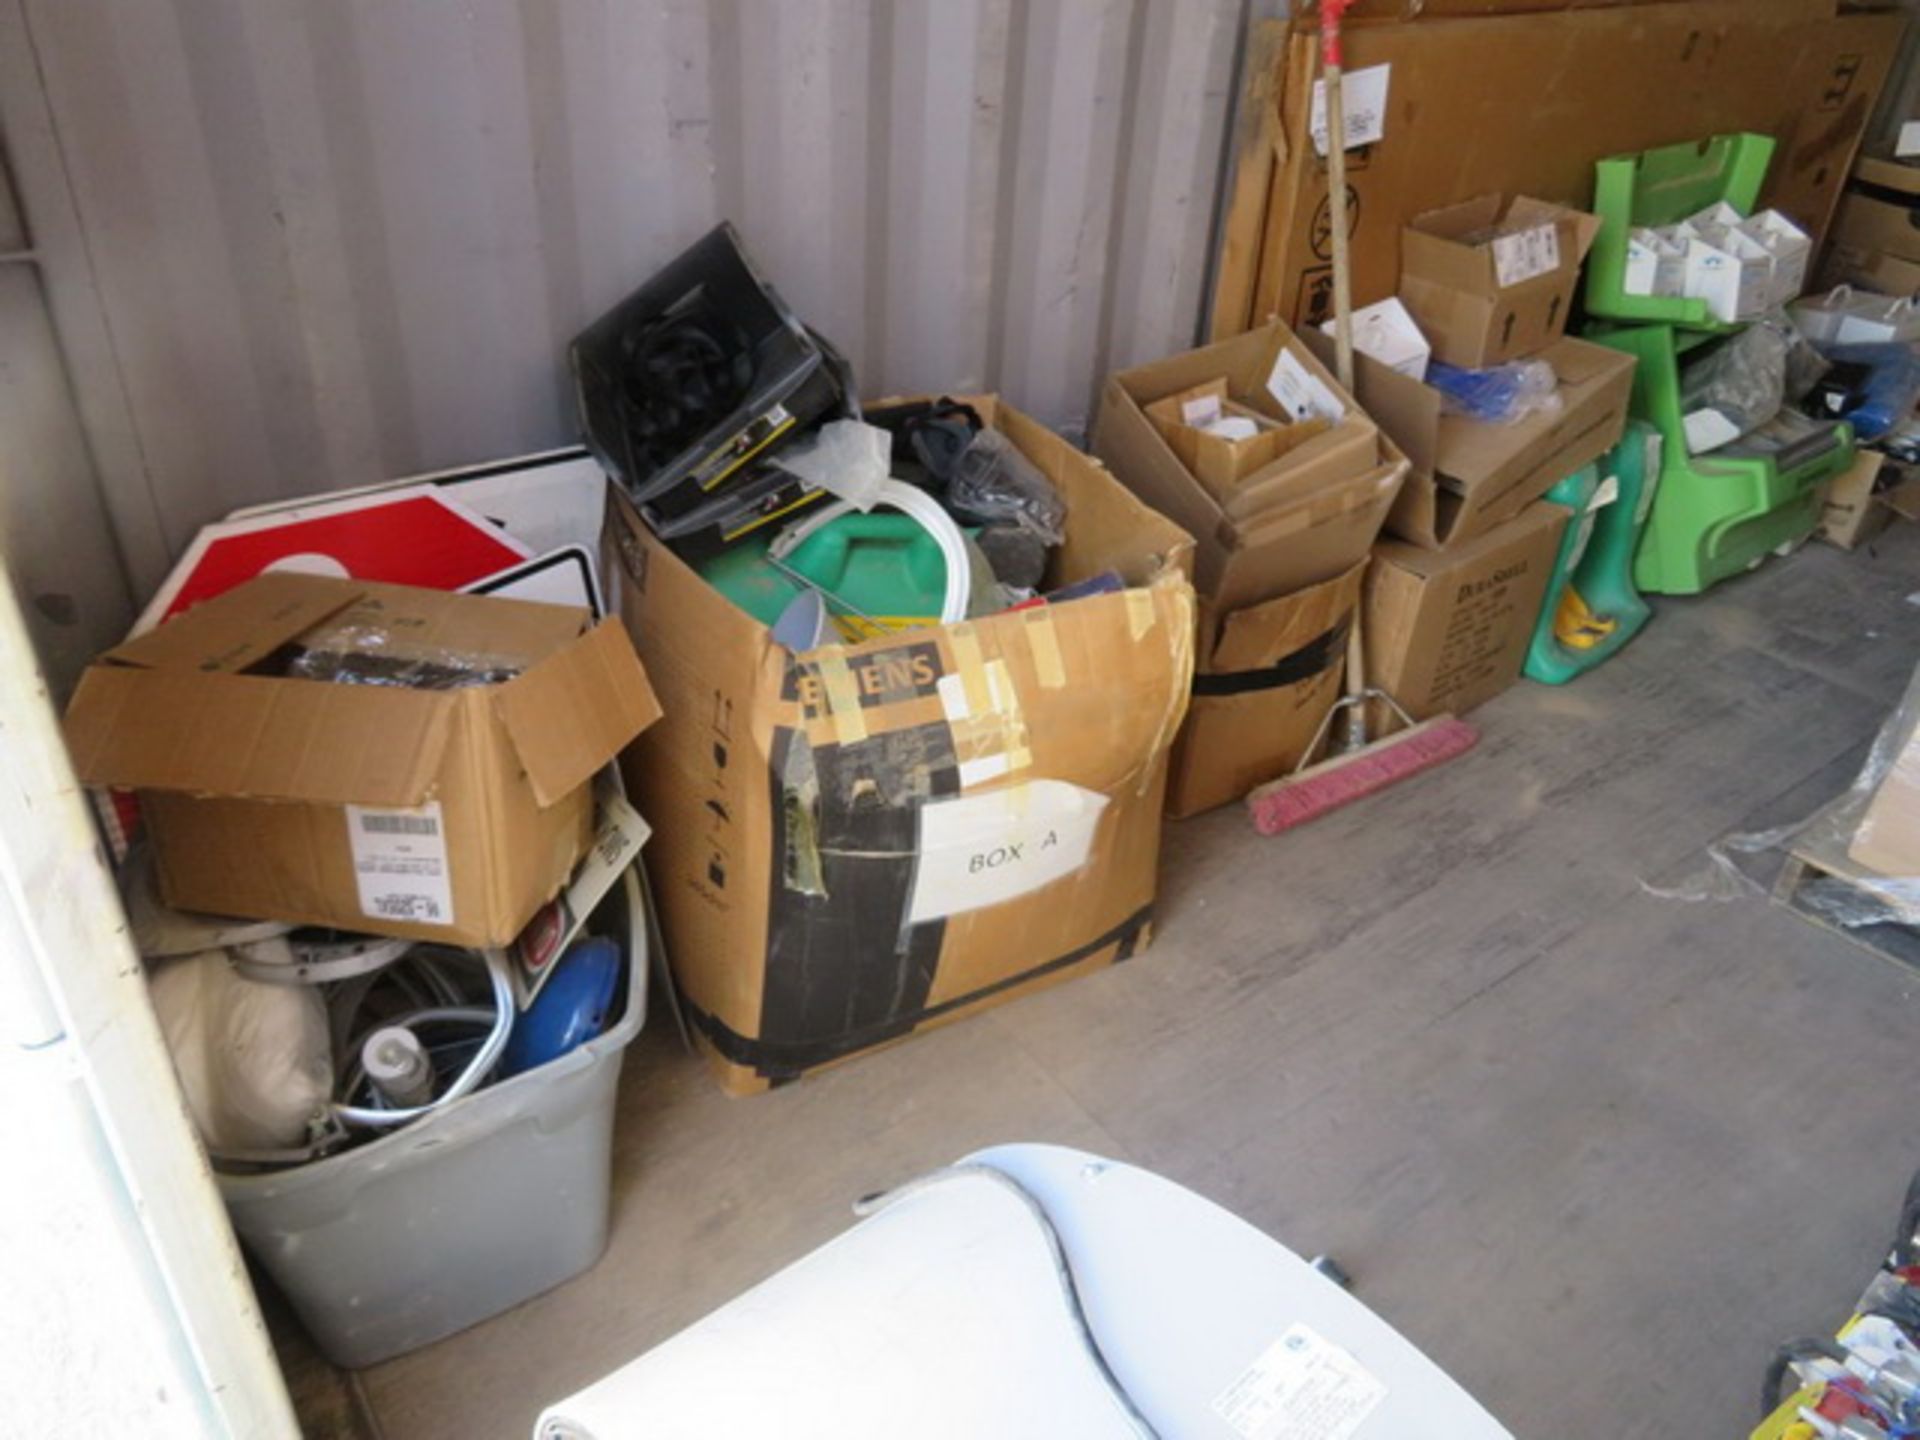 Contents of Shipping Container. To Include 1/2" PVDF Tubing, Safety Glasses, Safety Signs,